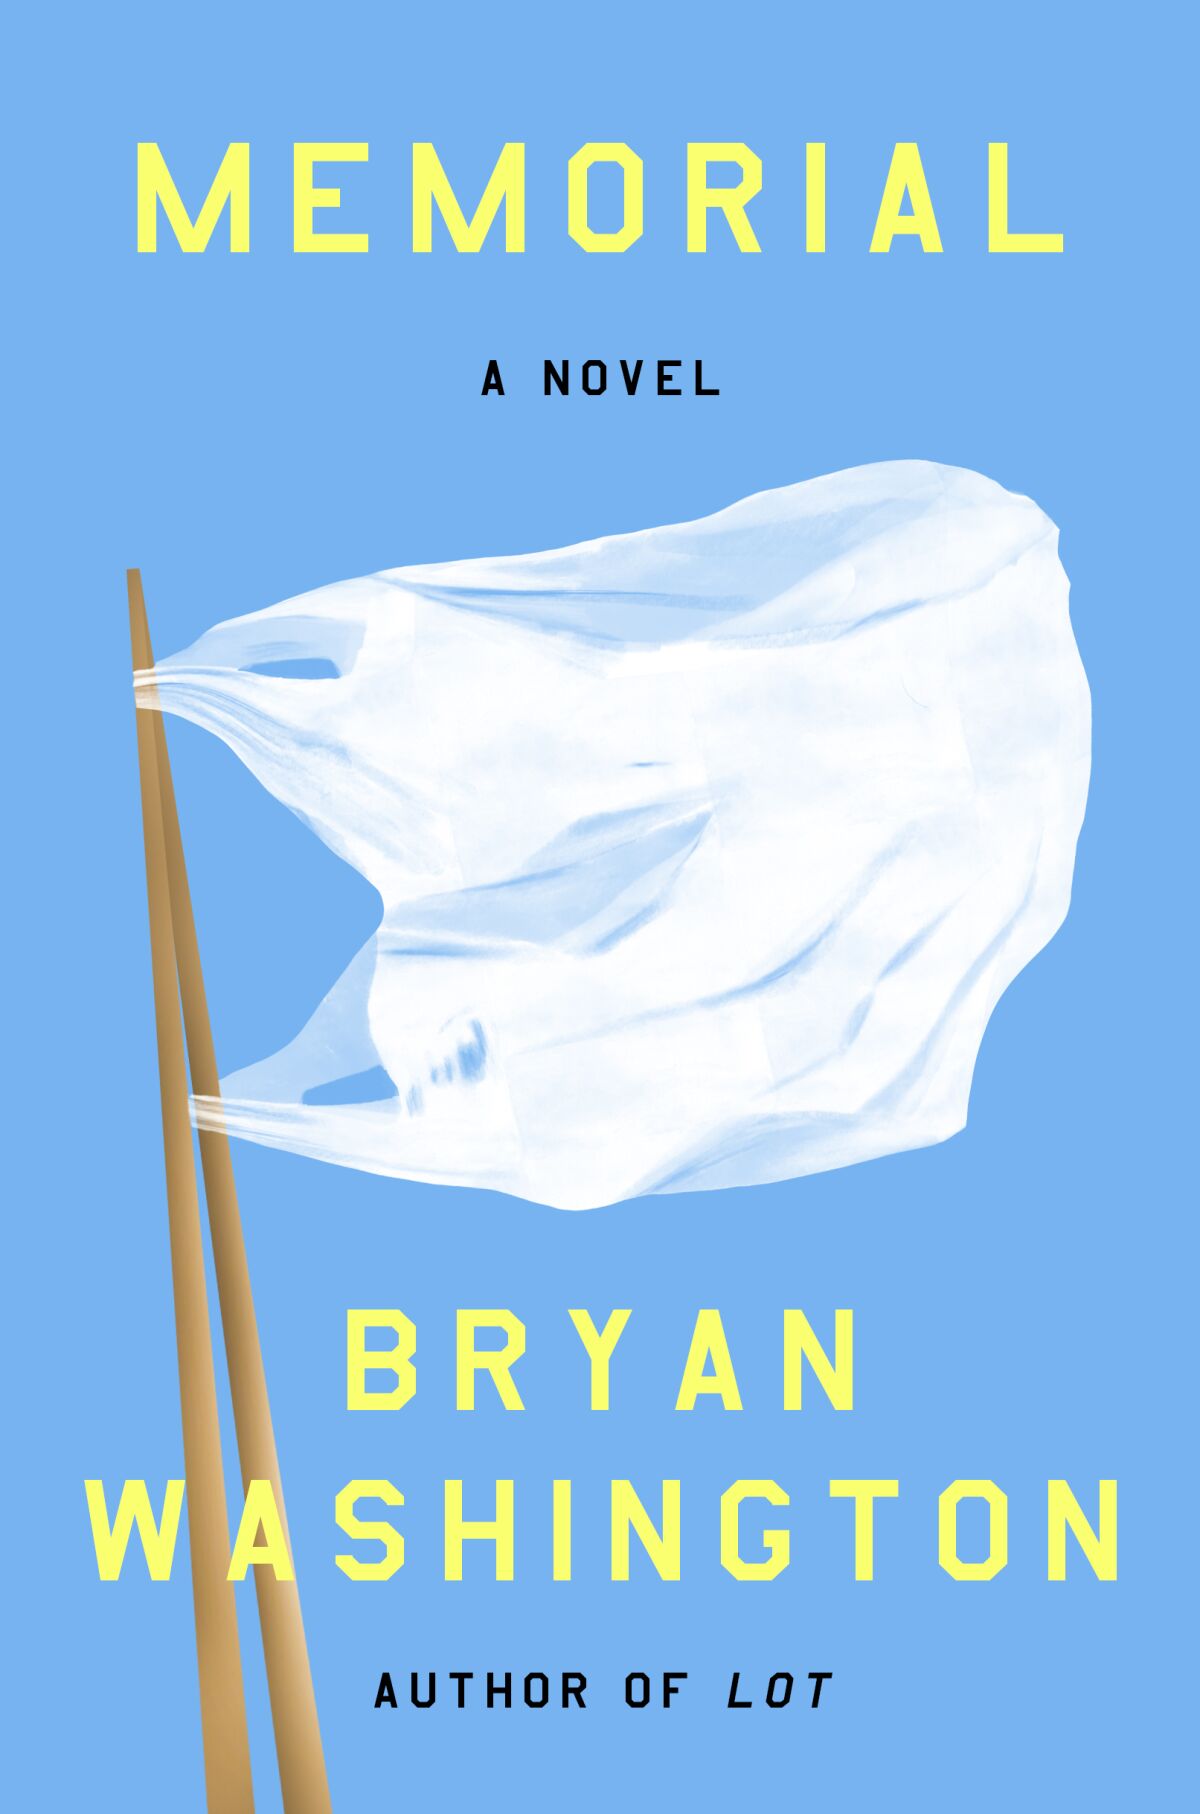 Book jacket for "Memorial" by author Bryan Washington,